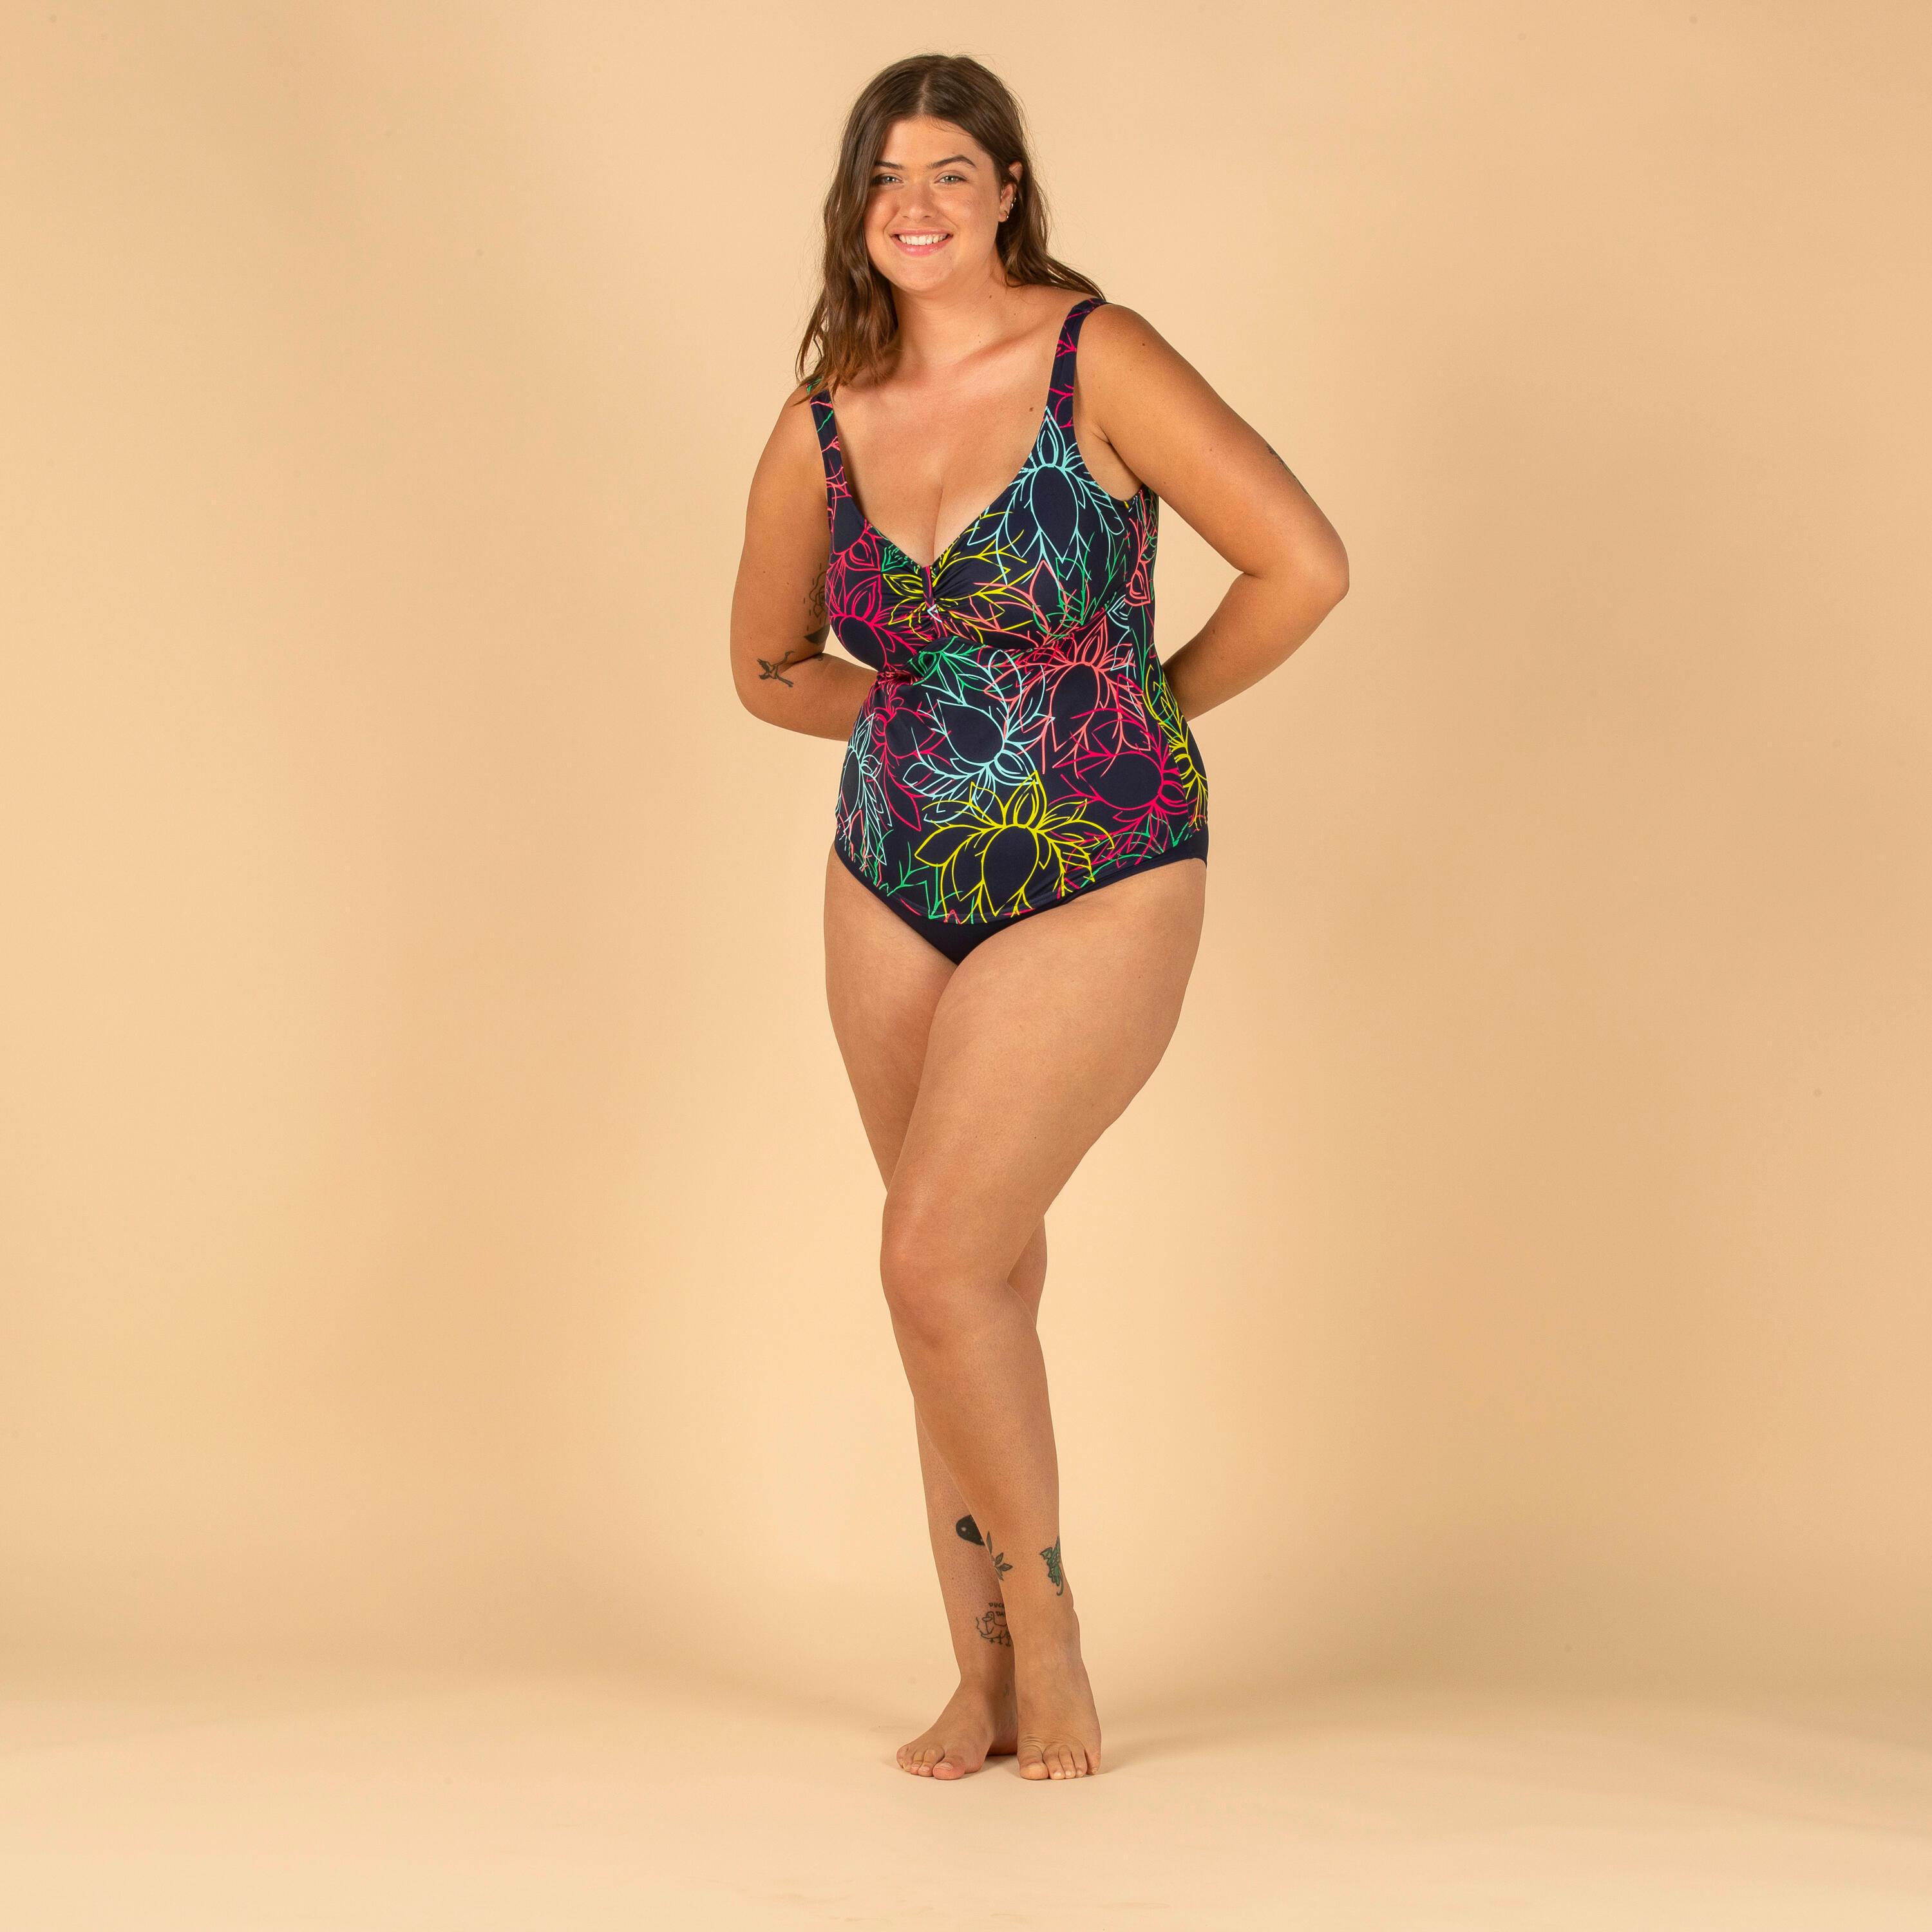 Refurbished Womens 1-Piece Body-Sculpting Swimsuit - A Grade 7/7